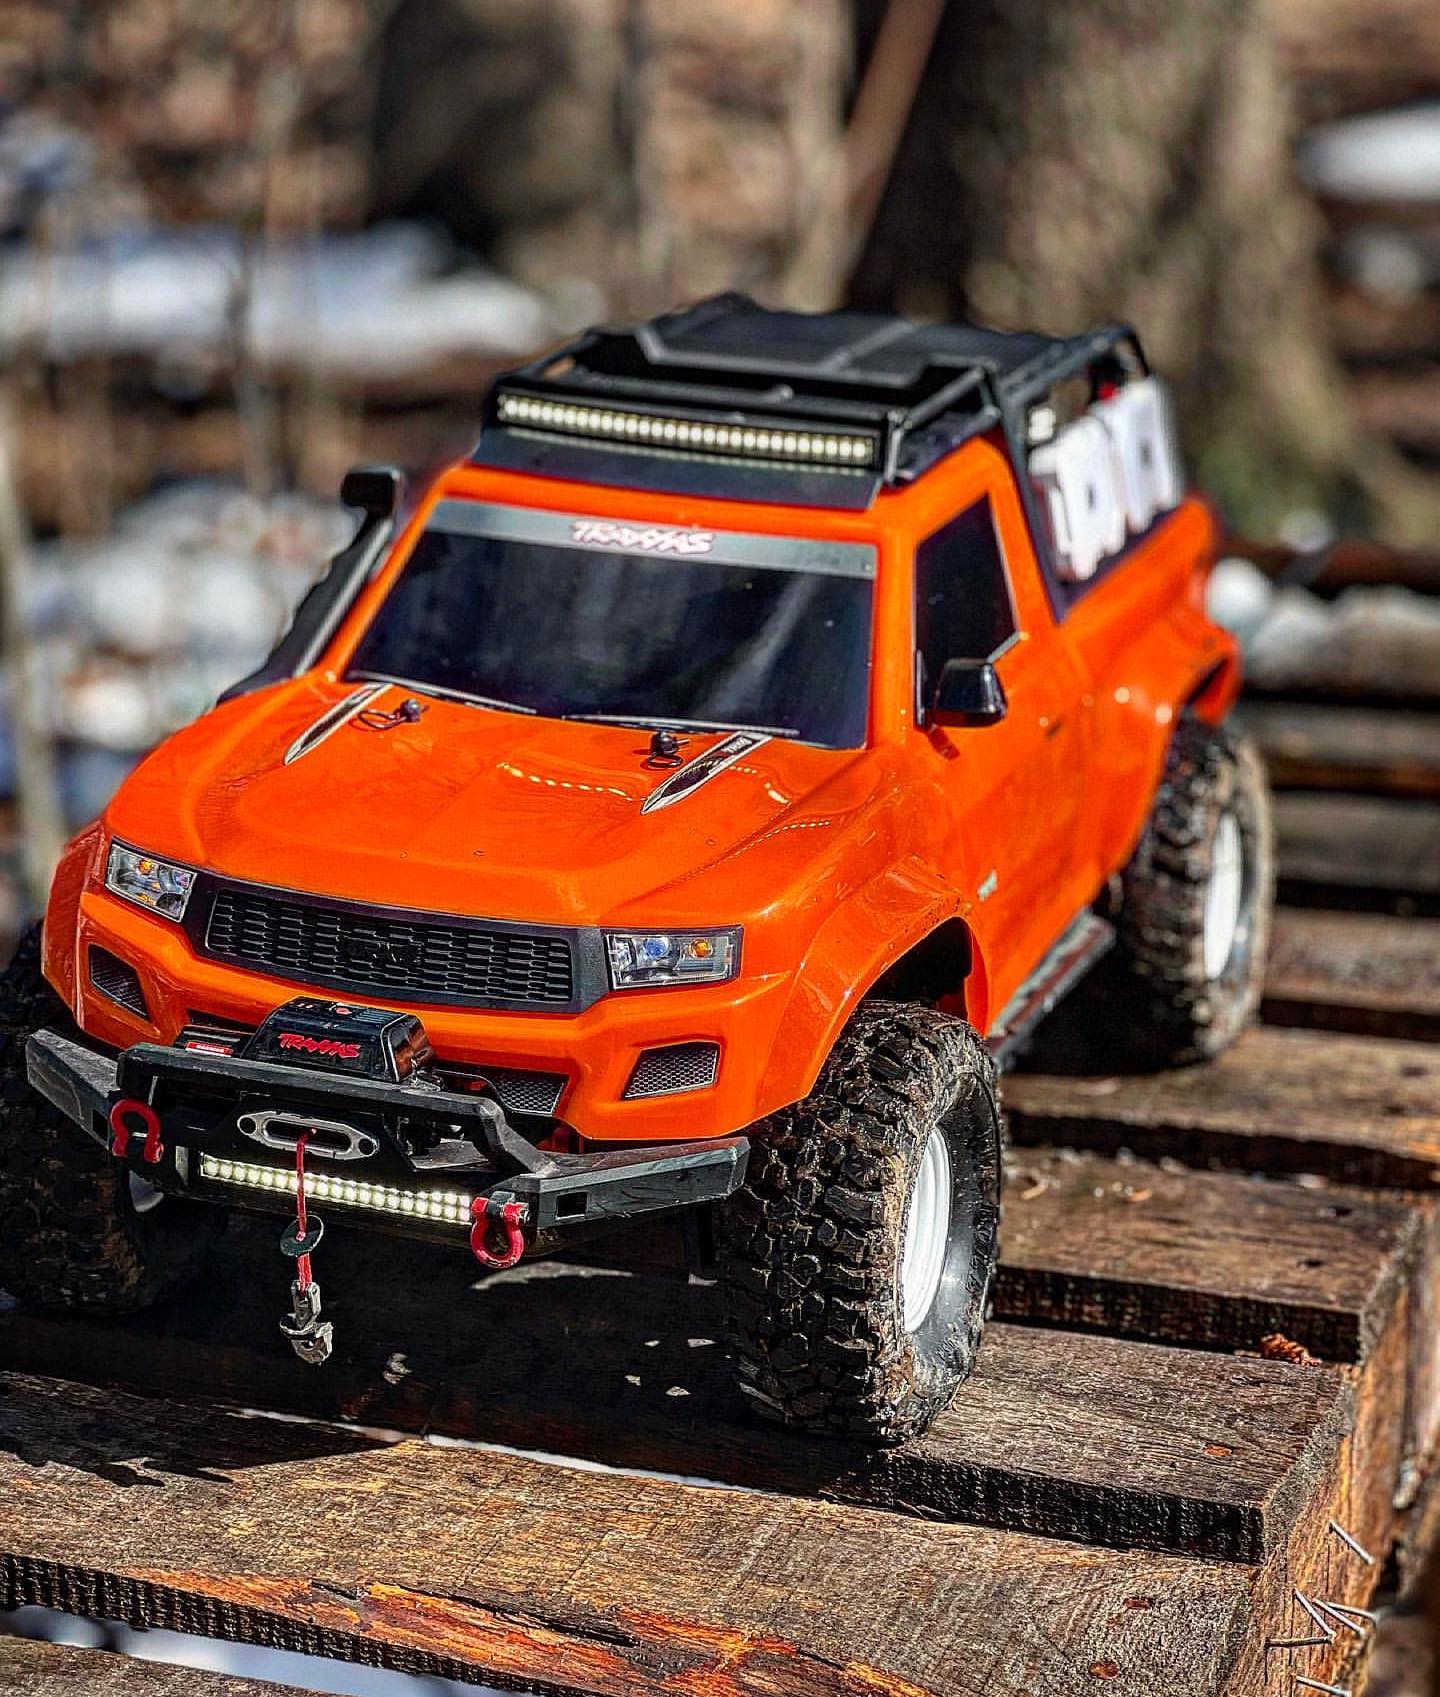 Traxxas on Twitter: "That is one good looking #Traxxas Sport! 👏🏼 Which TRX -4 accessory is a must-have?? 👉🏼 Winch.. Pro Scale Lighting.. Expedition  Rack.. https://t.co/4jkDNGc2A8 🧡 [[Model # 82024-4]] #TRX4Sport  #FastestNameInRadioControl ...